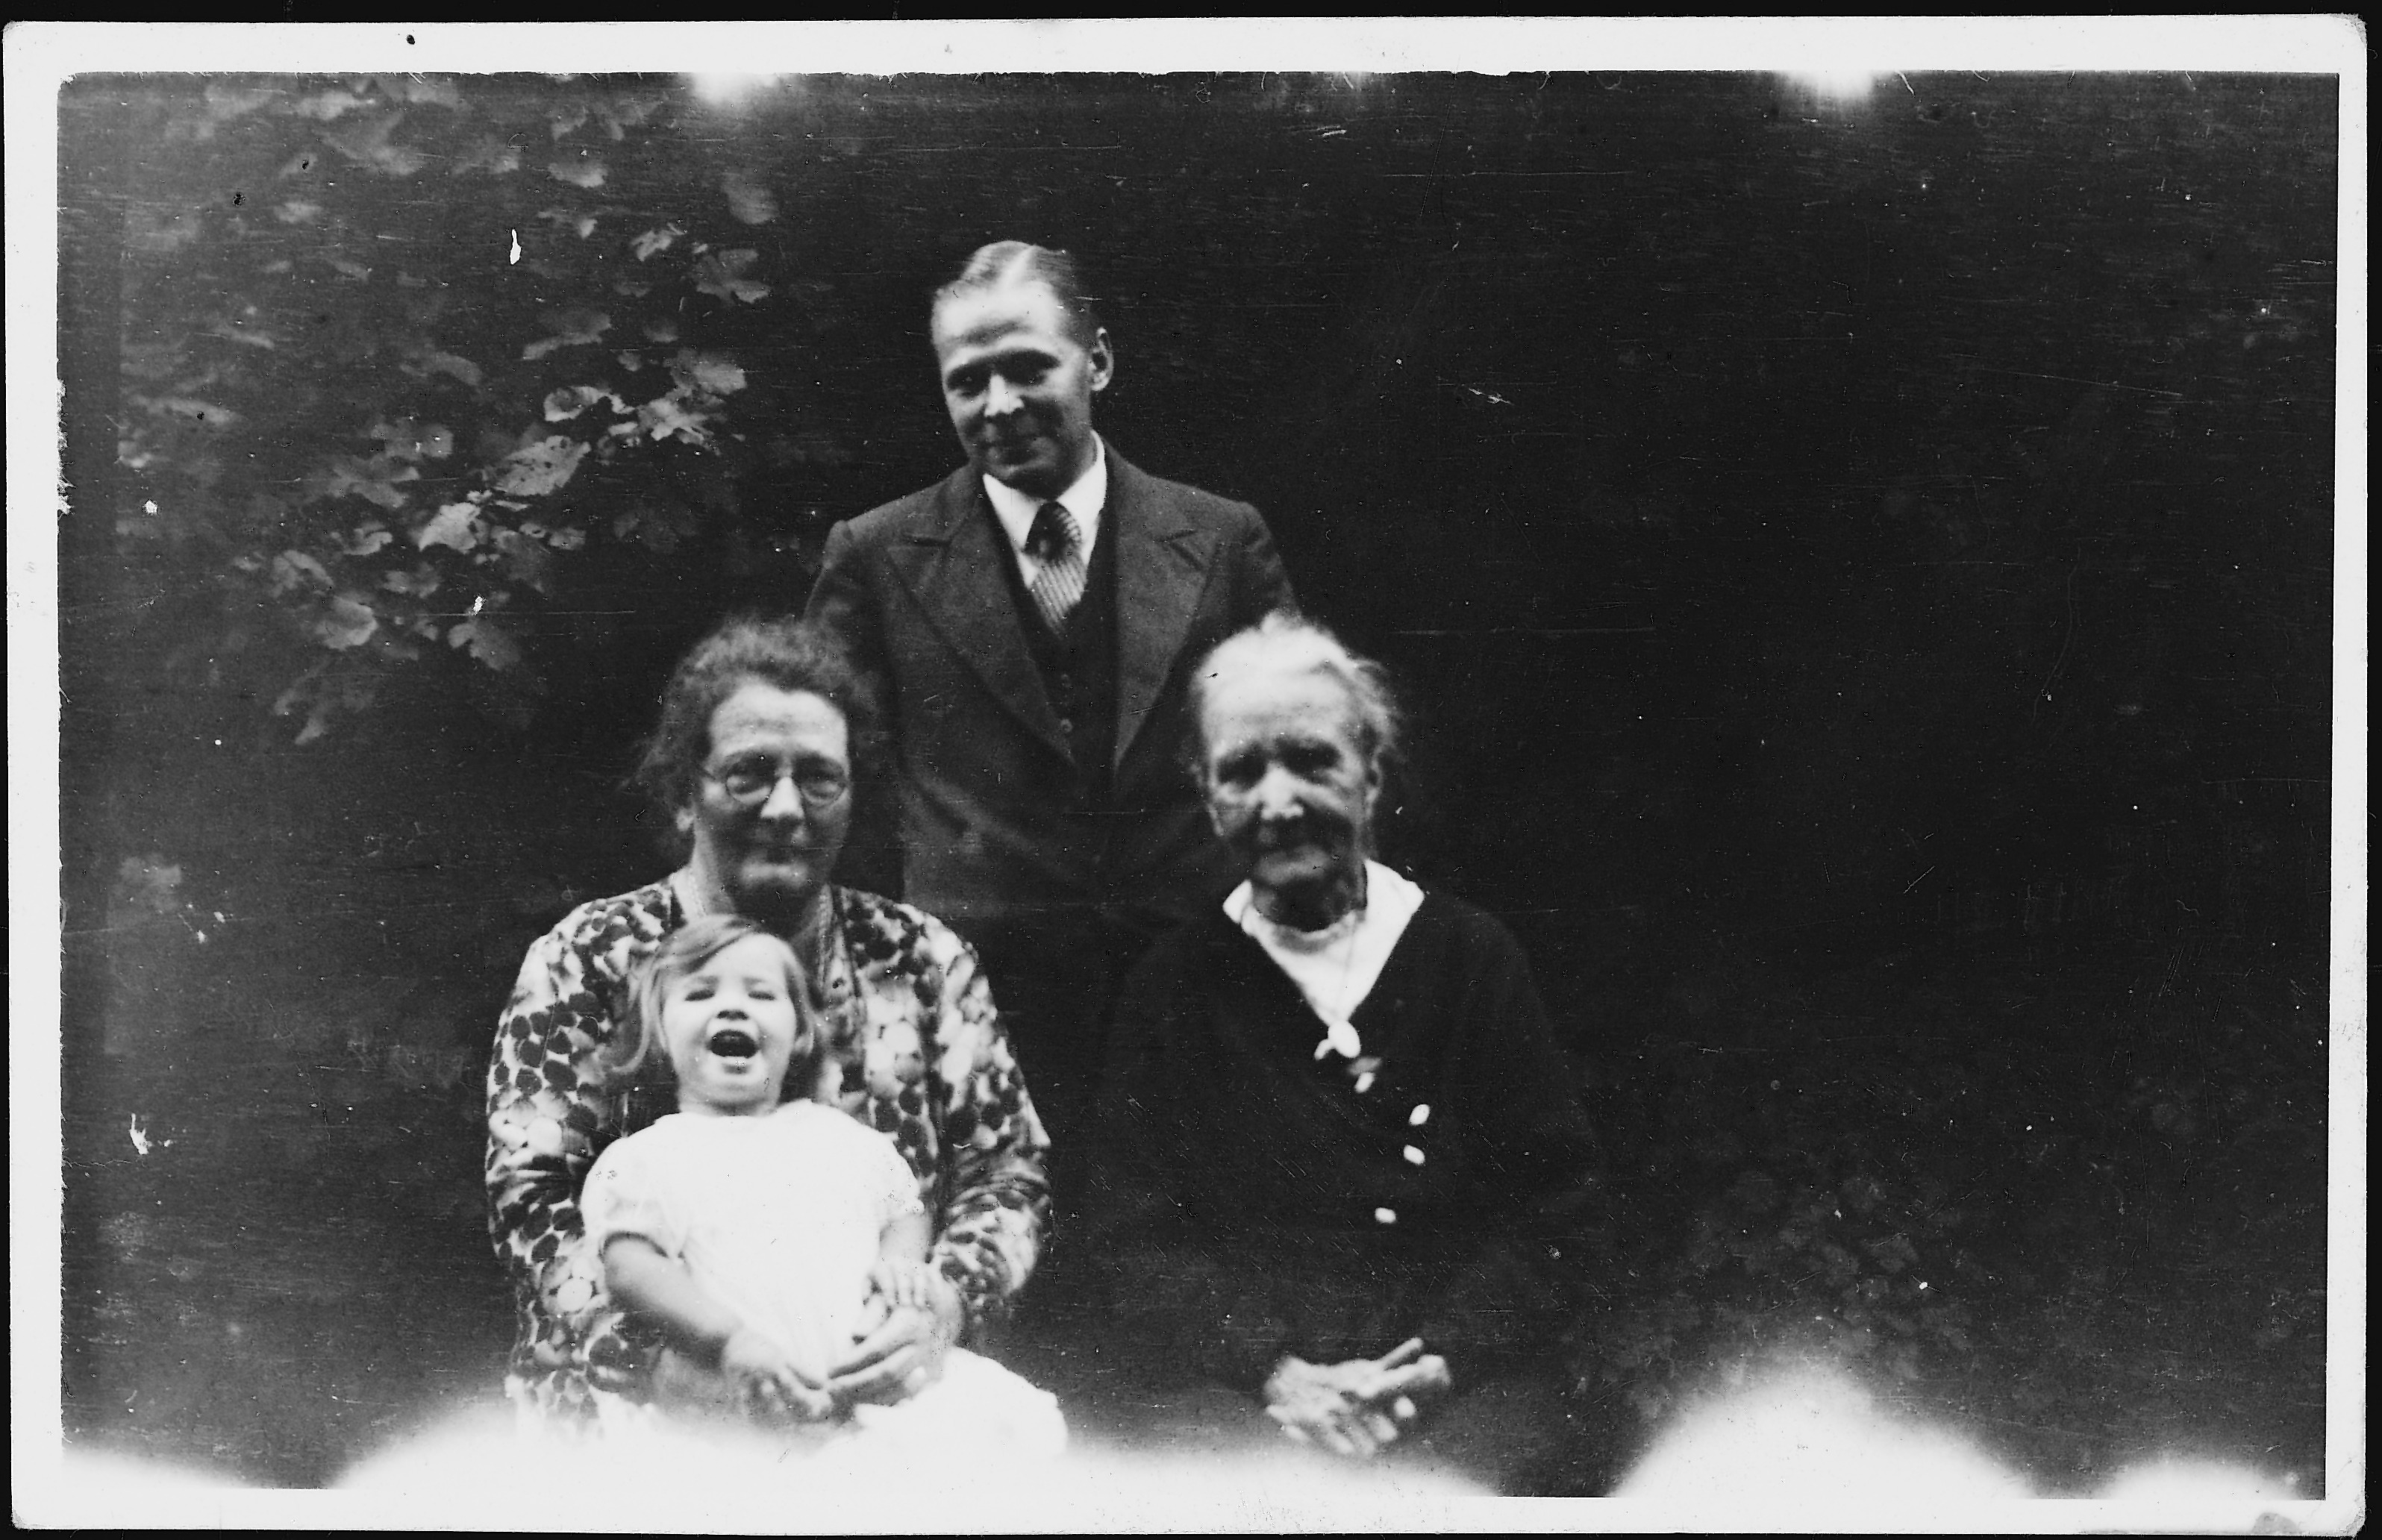 Four generations: Margaret Roberts, her father Albert Roberts, grandmother Martha (Hales) Roberts and great-grandmother Louise (Williams) Hales